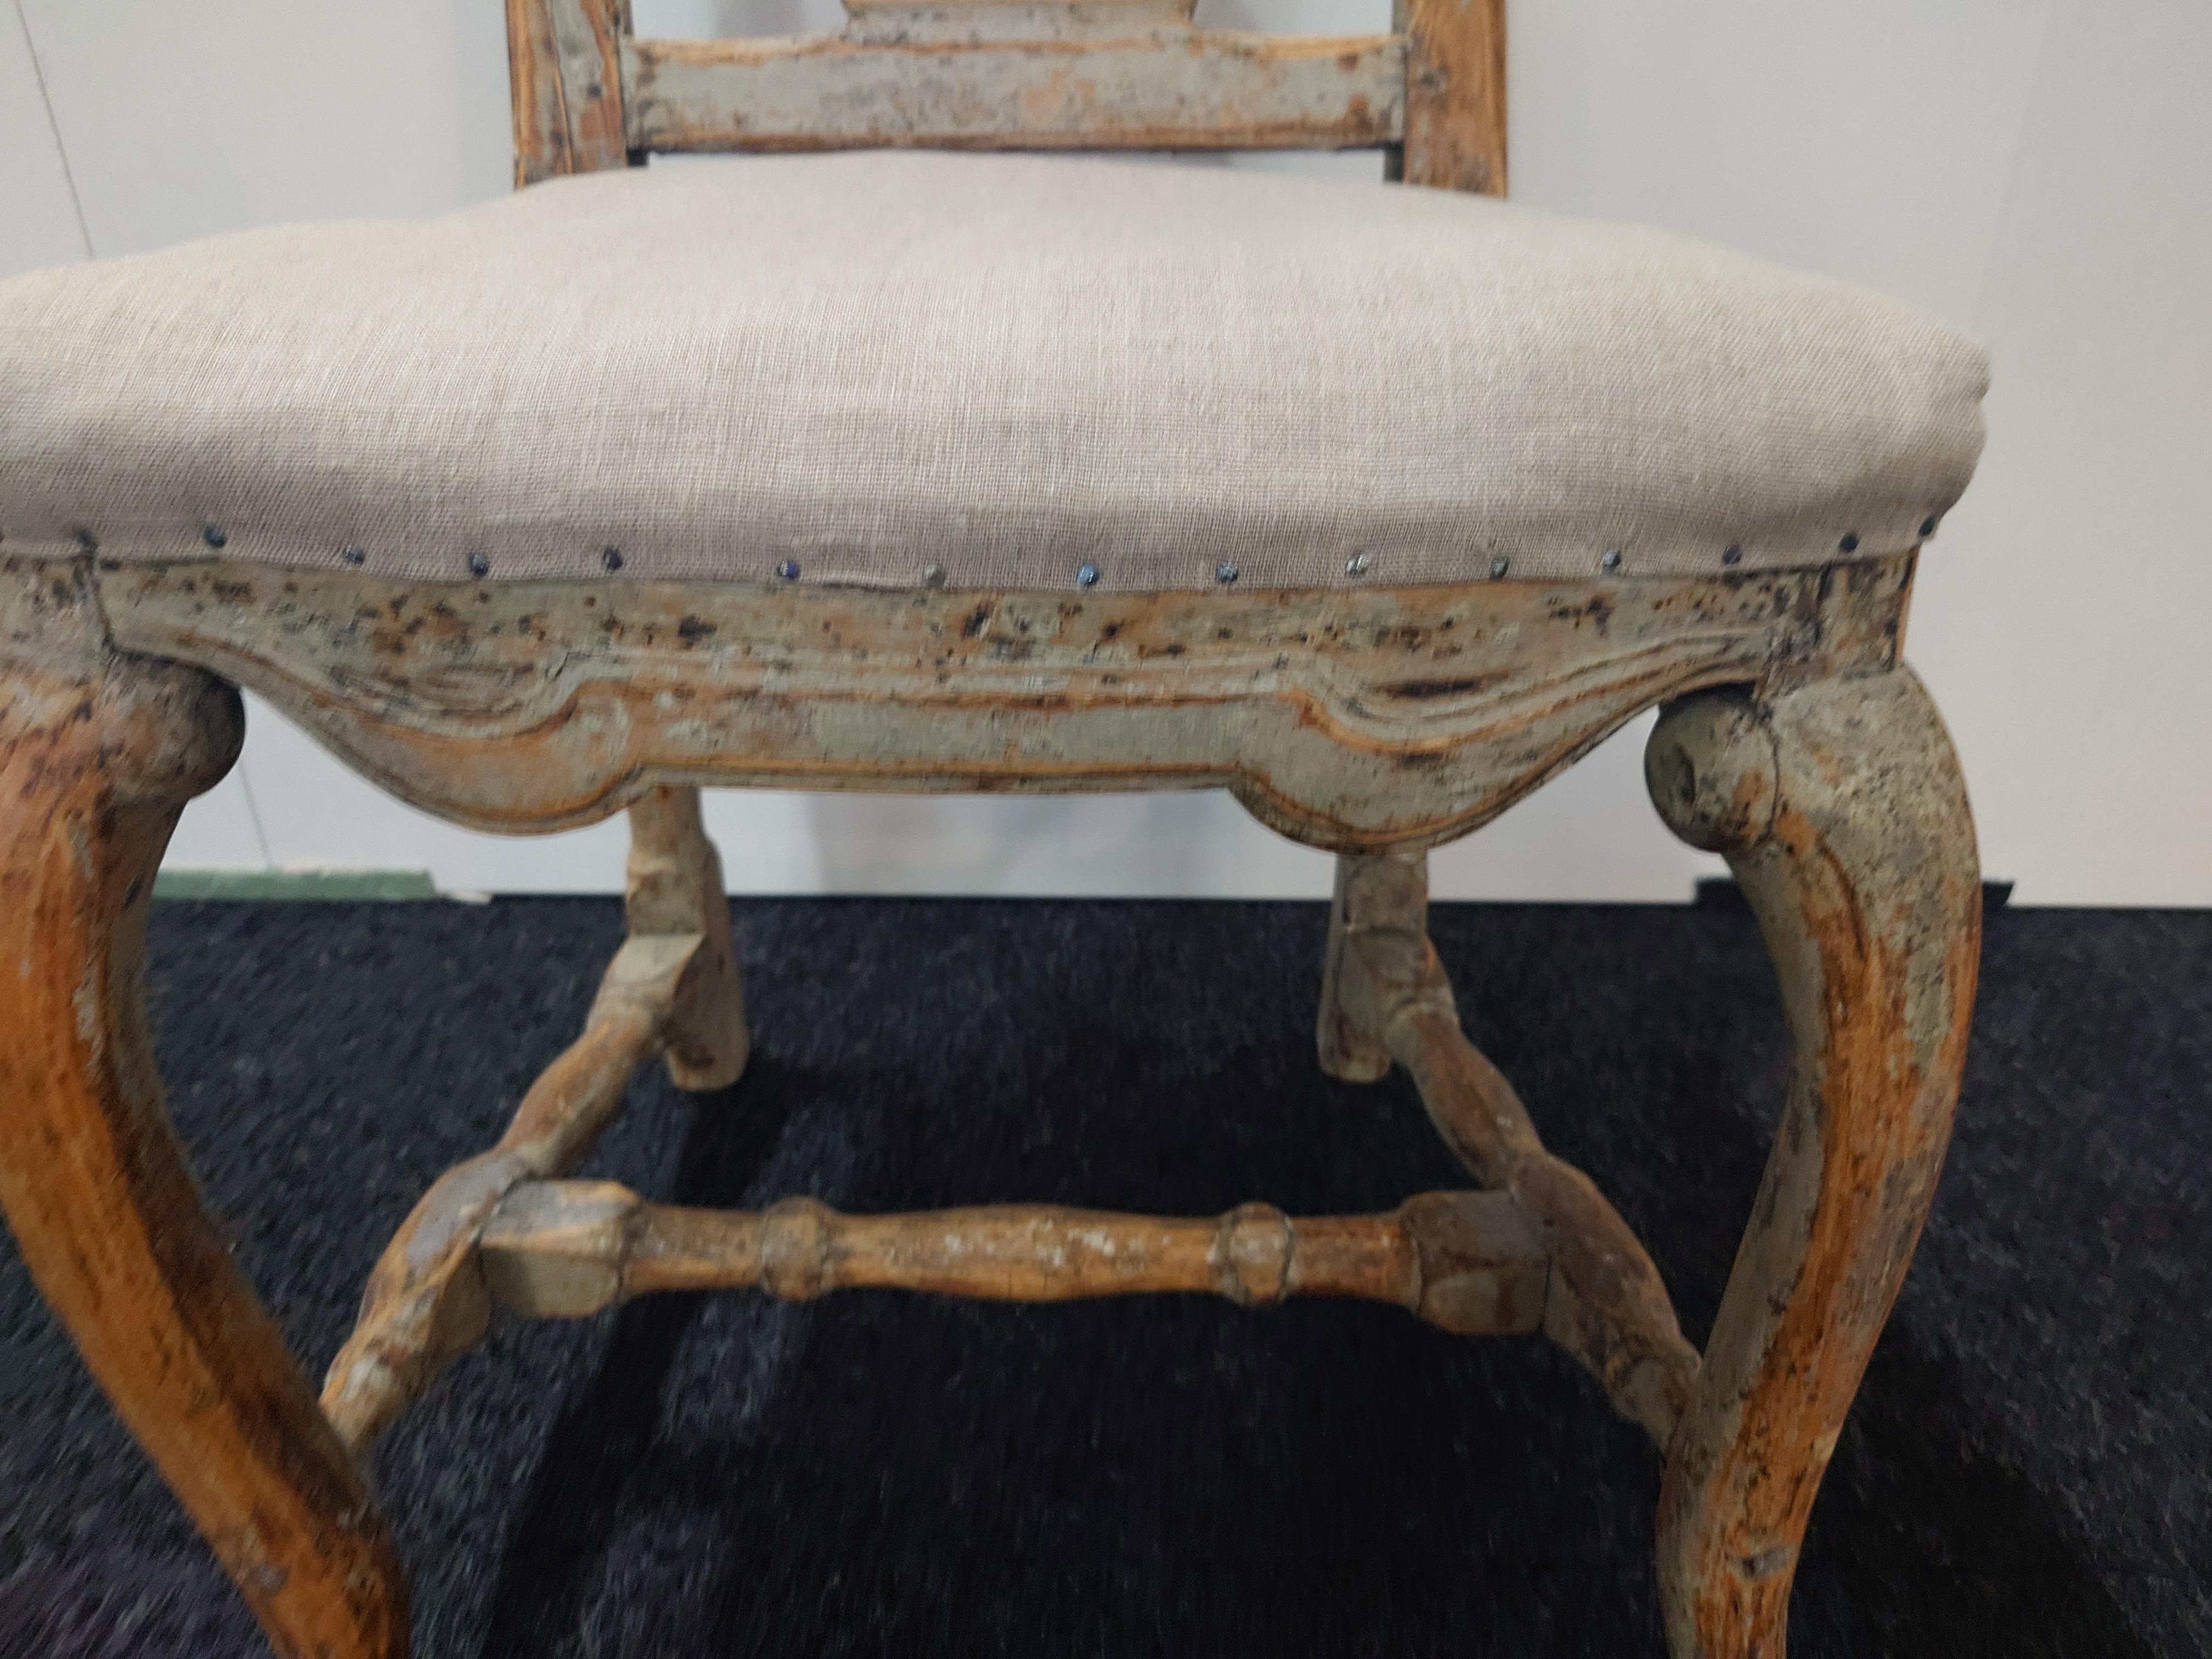 A fantastic mid 18th Century very genuine & rustic Late Baroque Chair from Umeå Västerbotten ,Northern Sweden.
The chair is scraped by hand to its original color.
The seat is reupholstered in linen fabric
The chair is stable in construction.
Made in